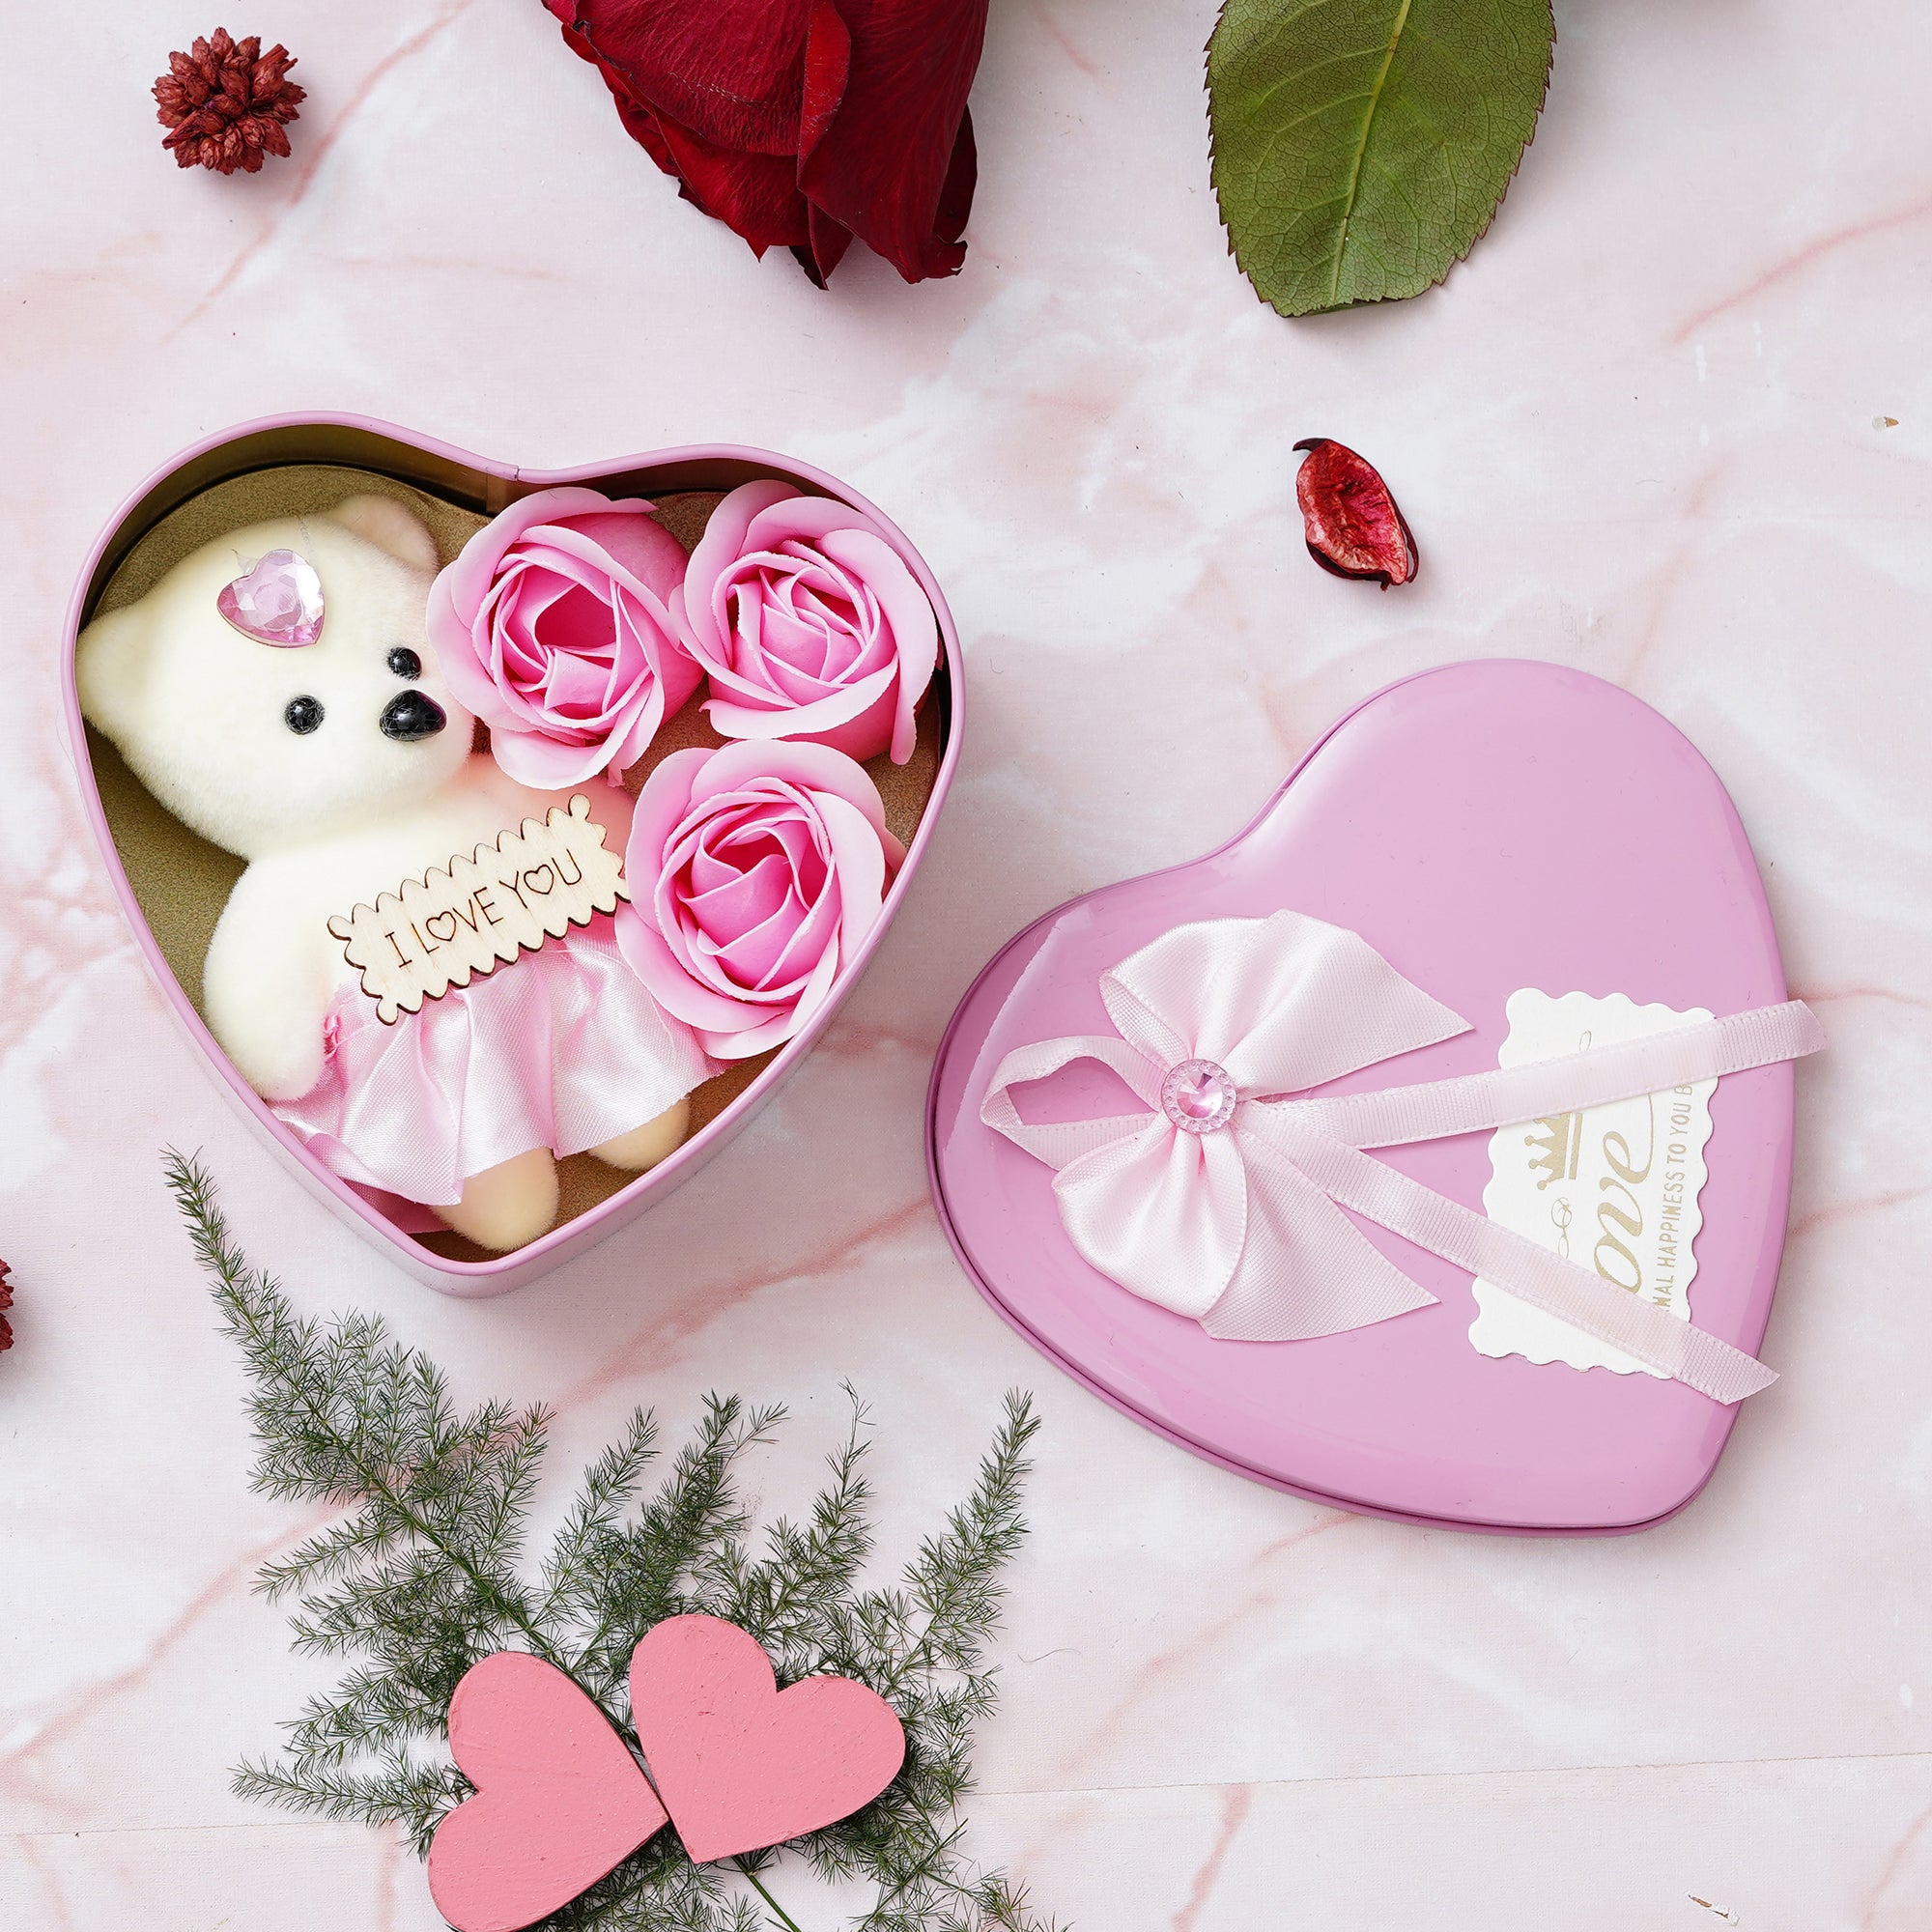 Valentine Combo of "Love You" Wooden Showpiece With Stand, Pink Heart Shaped Gift Box with Teddy and Roses 3